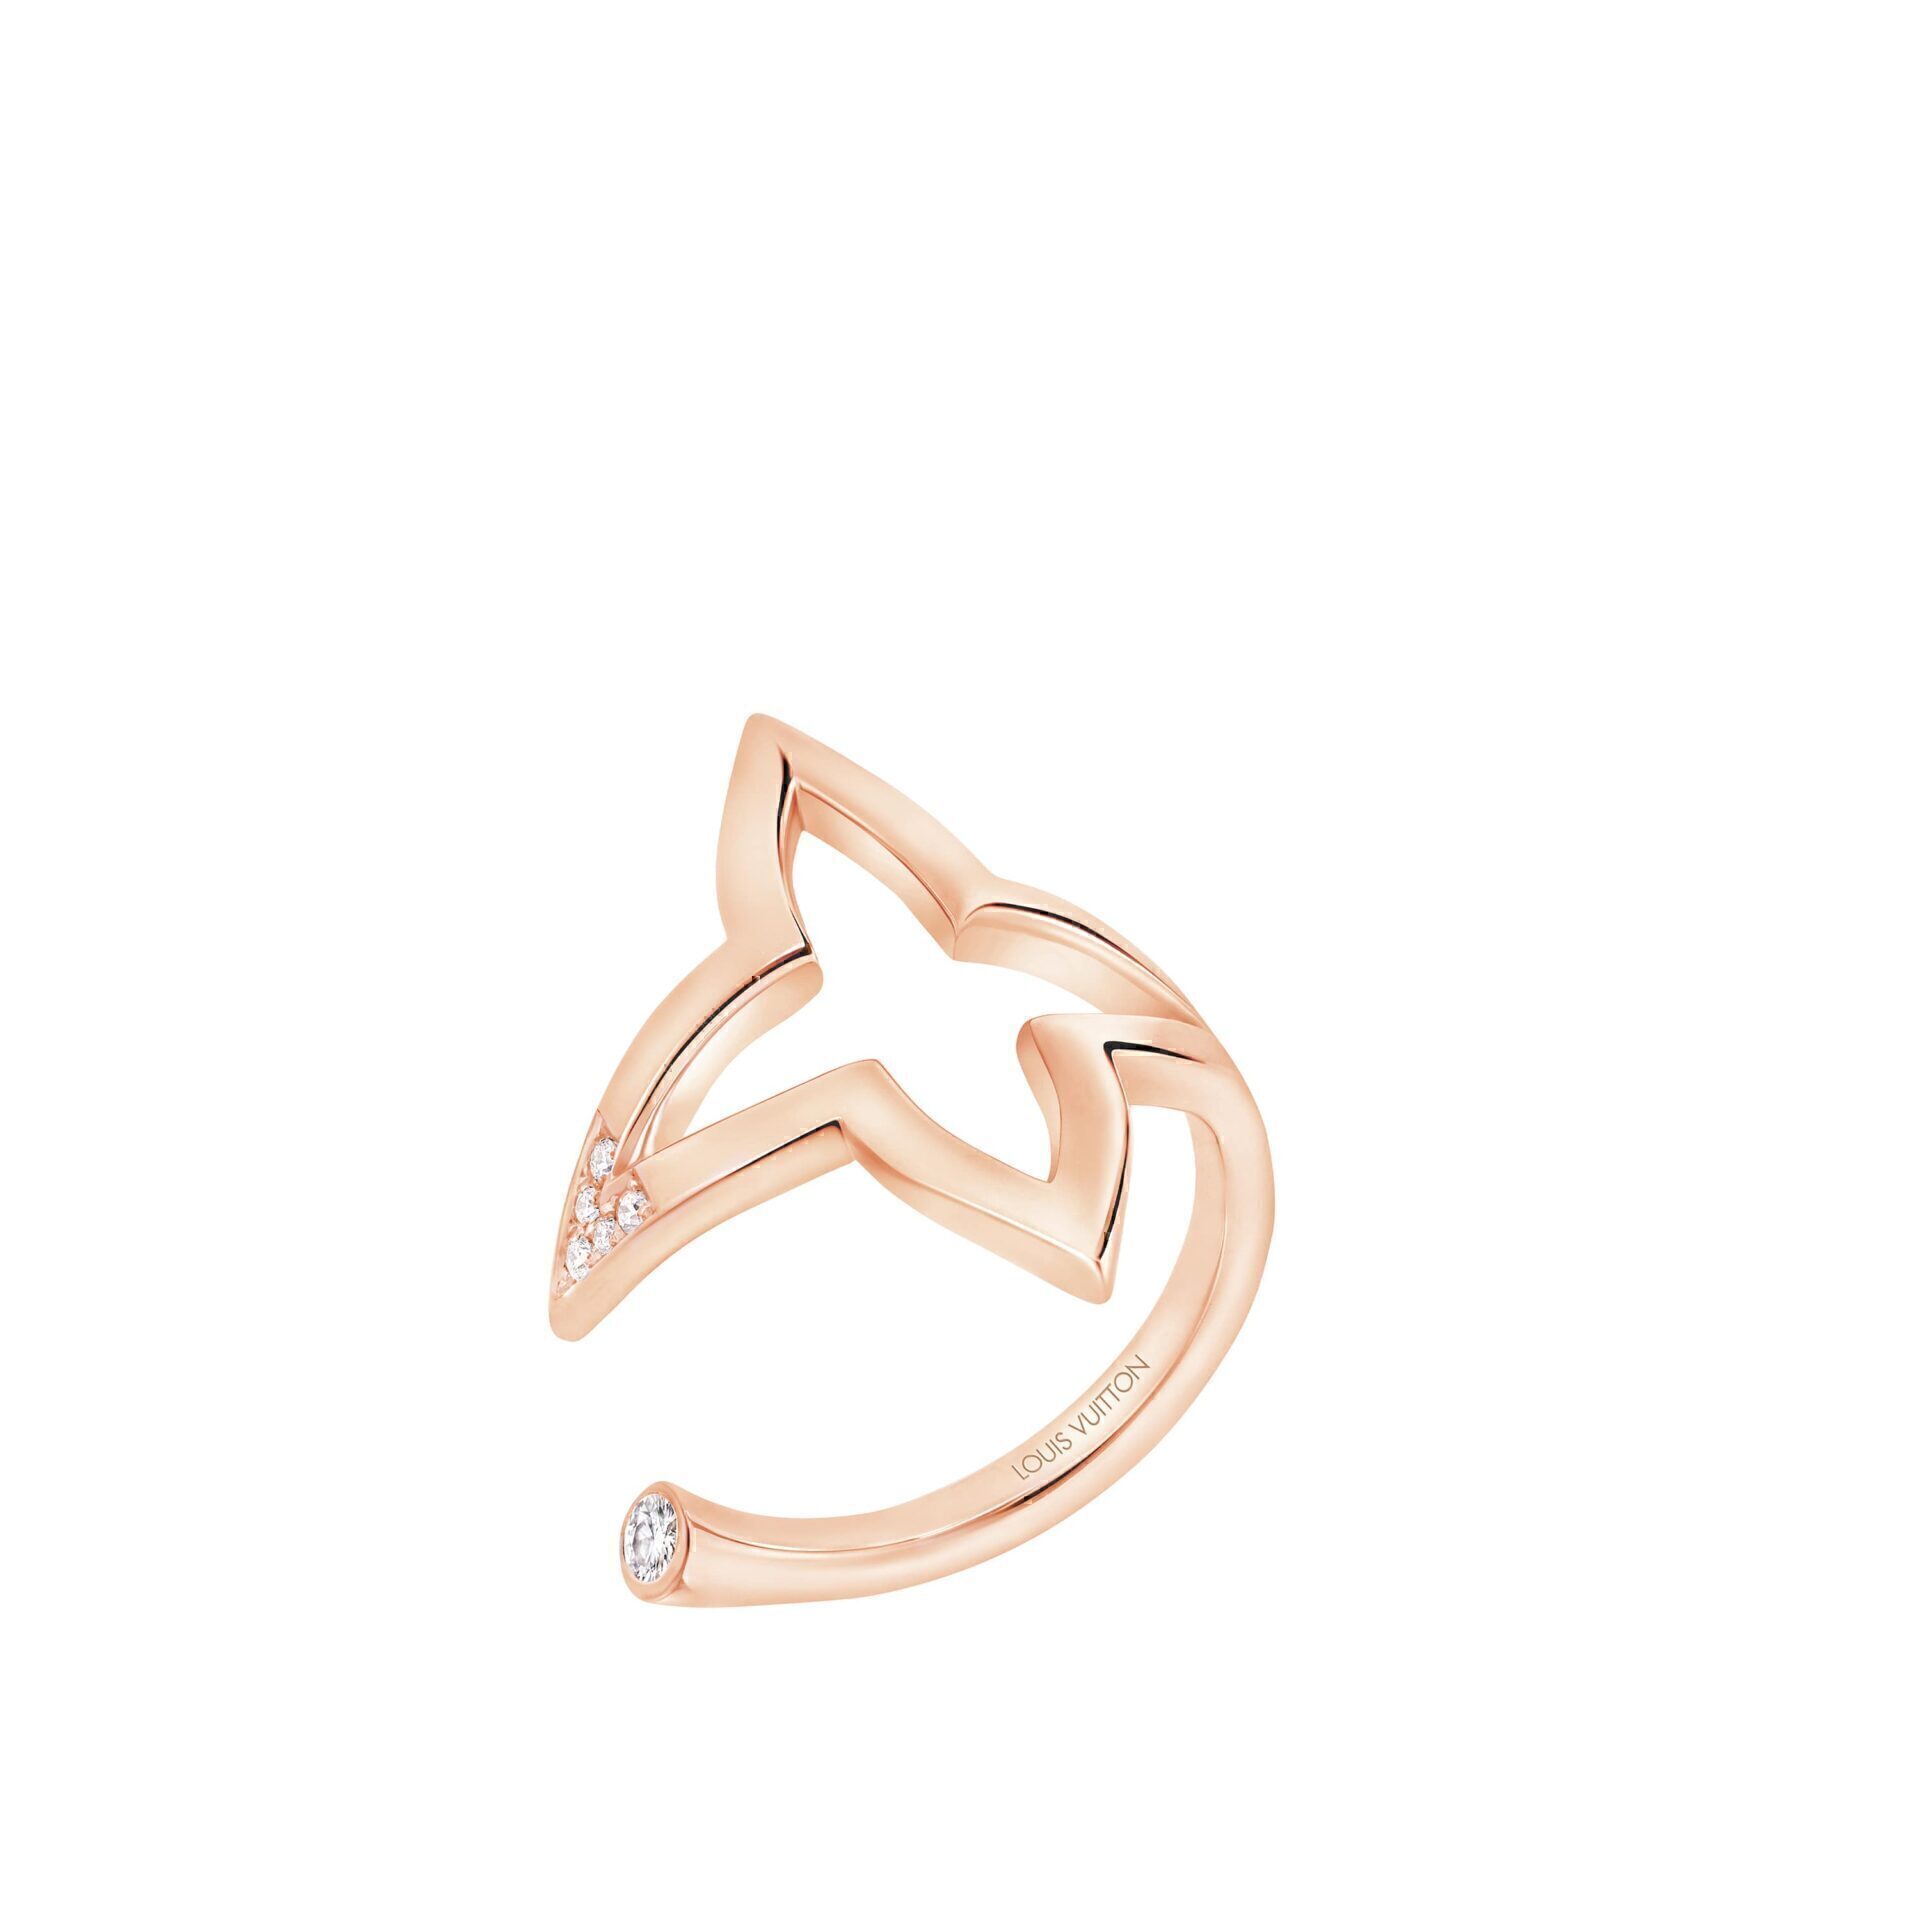 Blossom Open Ring In Pink Gold And Diamonds 2 Nt$94,500